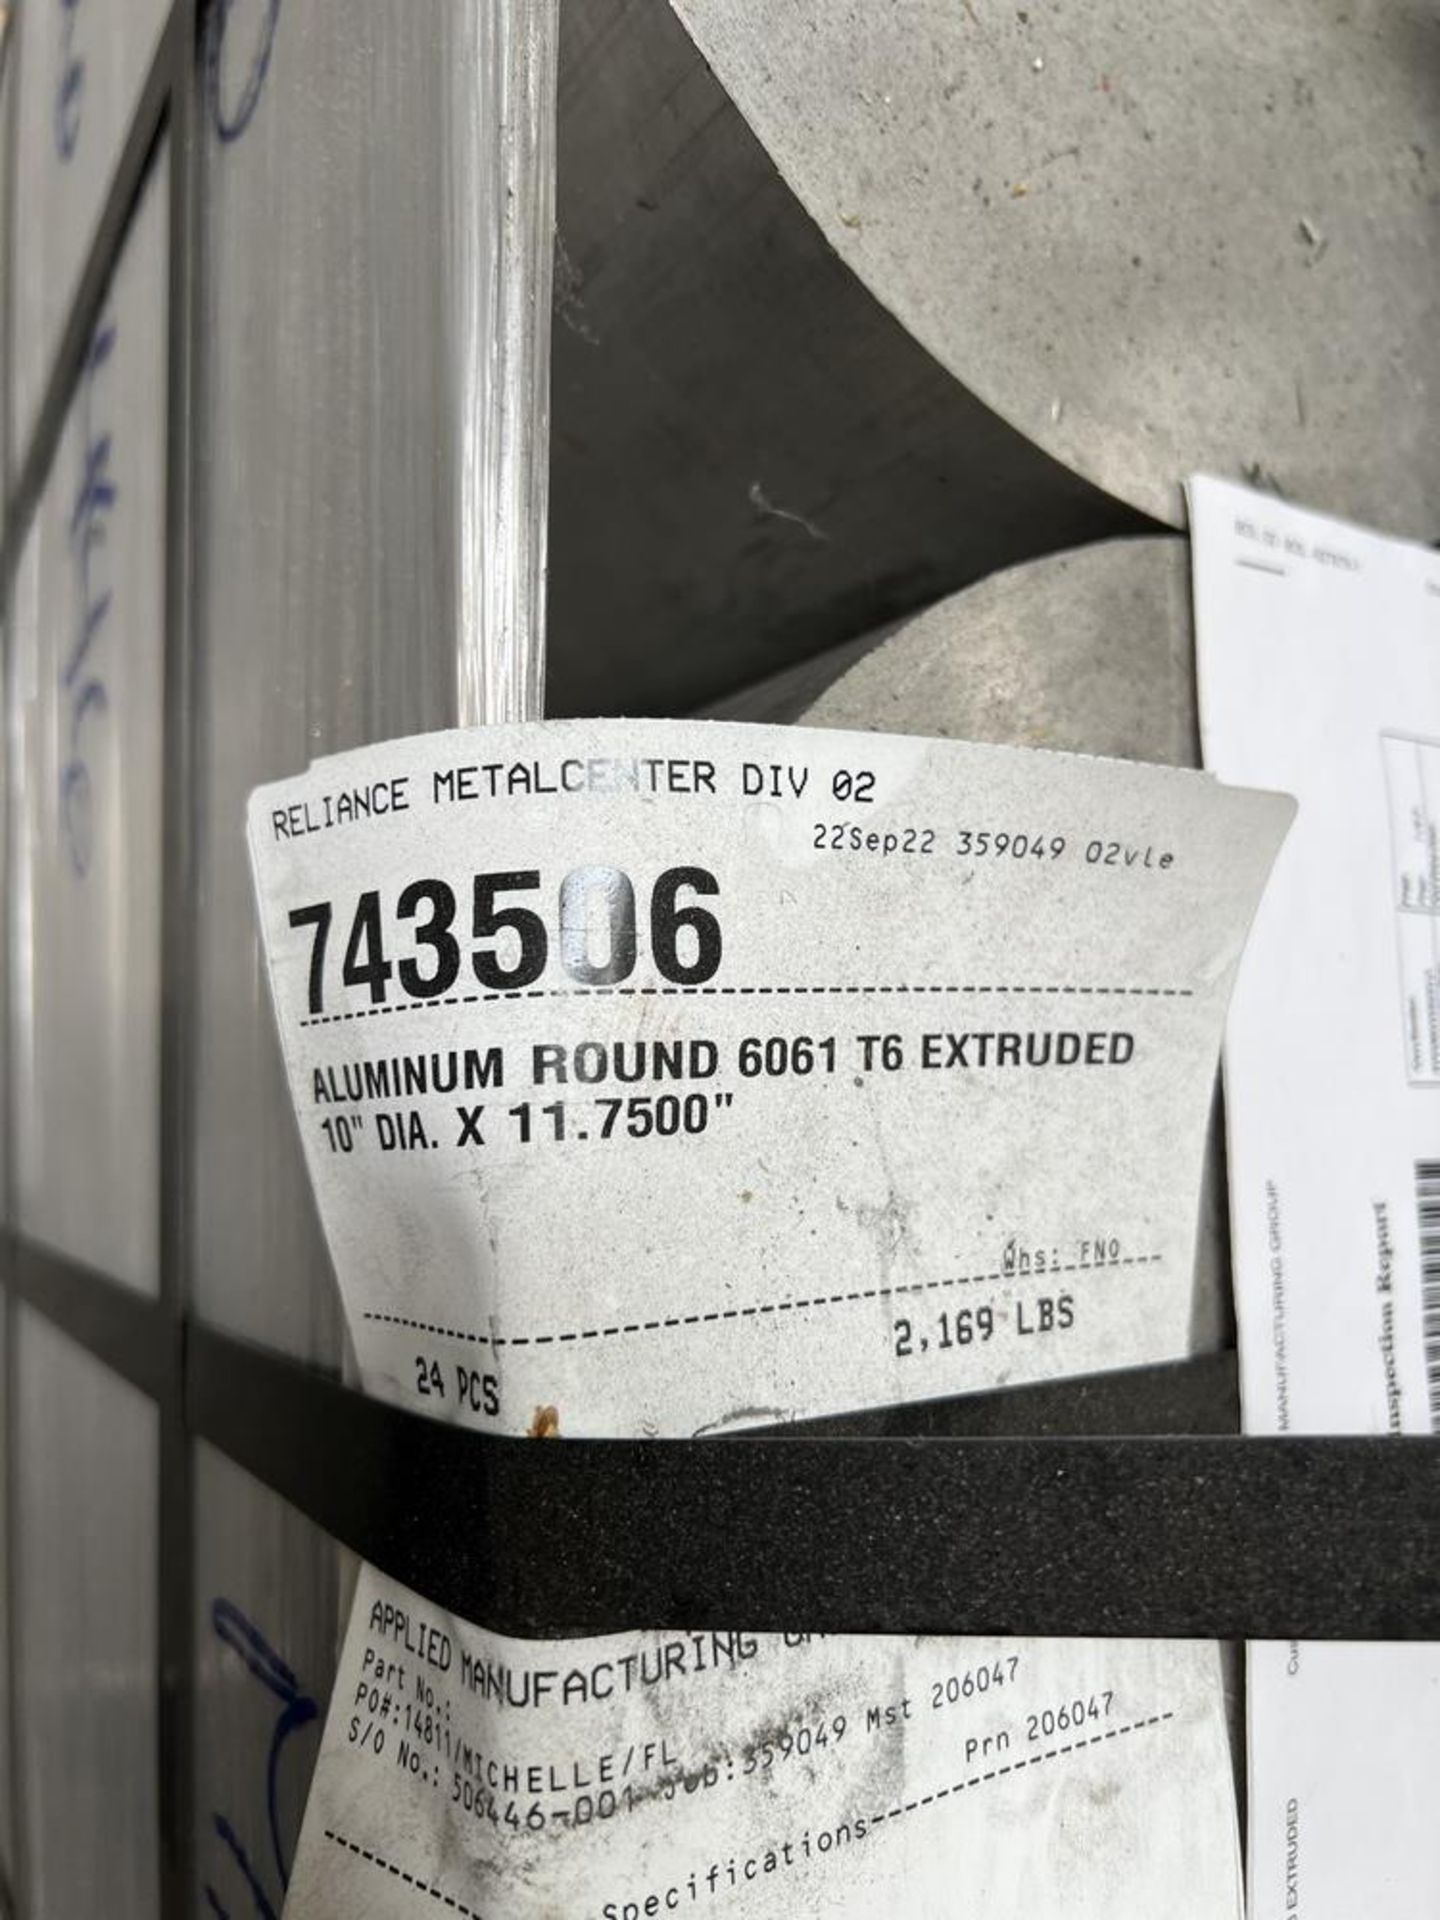 (24) Aluminum Round 6061 T6 Extruded 10" Dia x 11.75" With Certified Inspection Report 2169 Lbs - Image 3 of 6